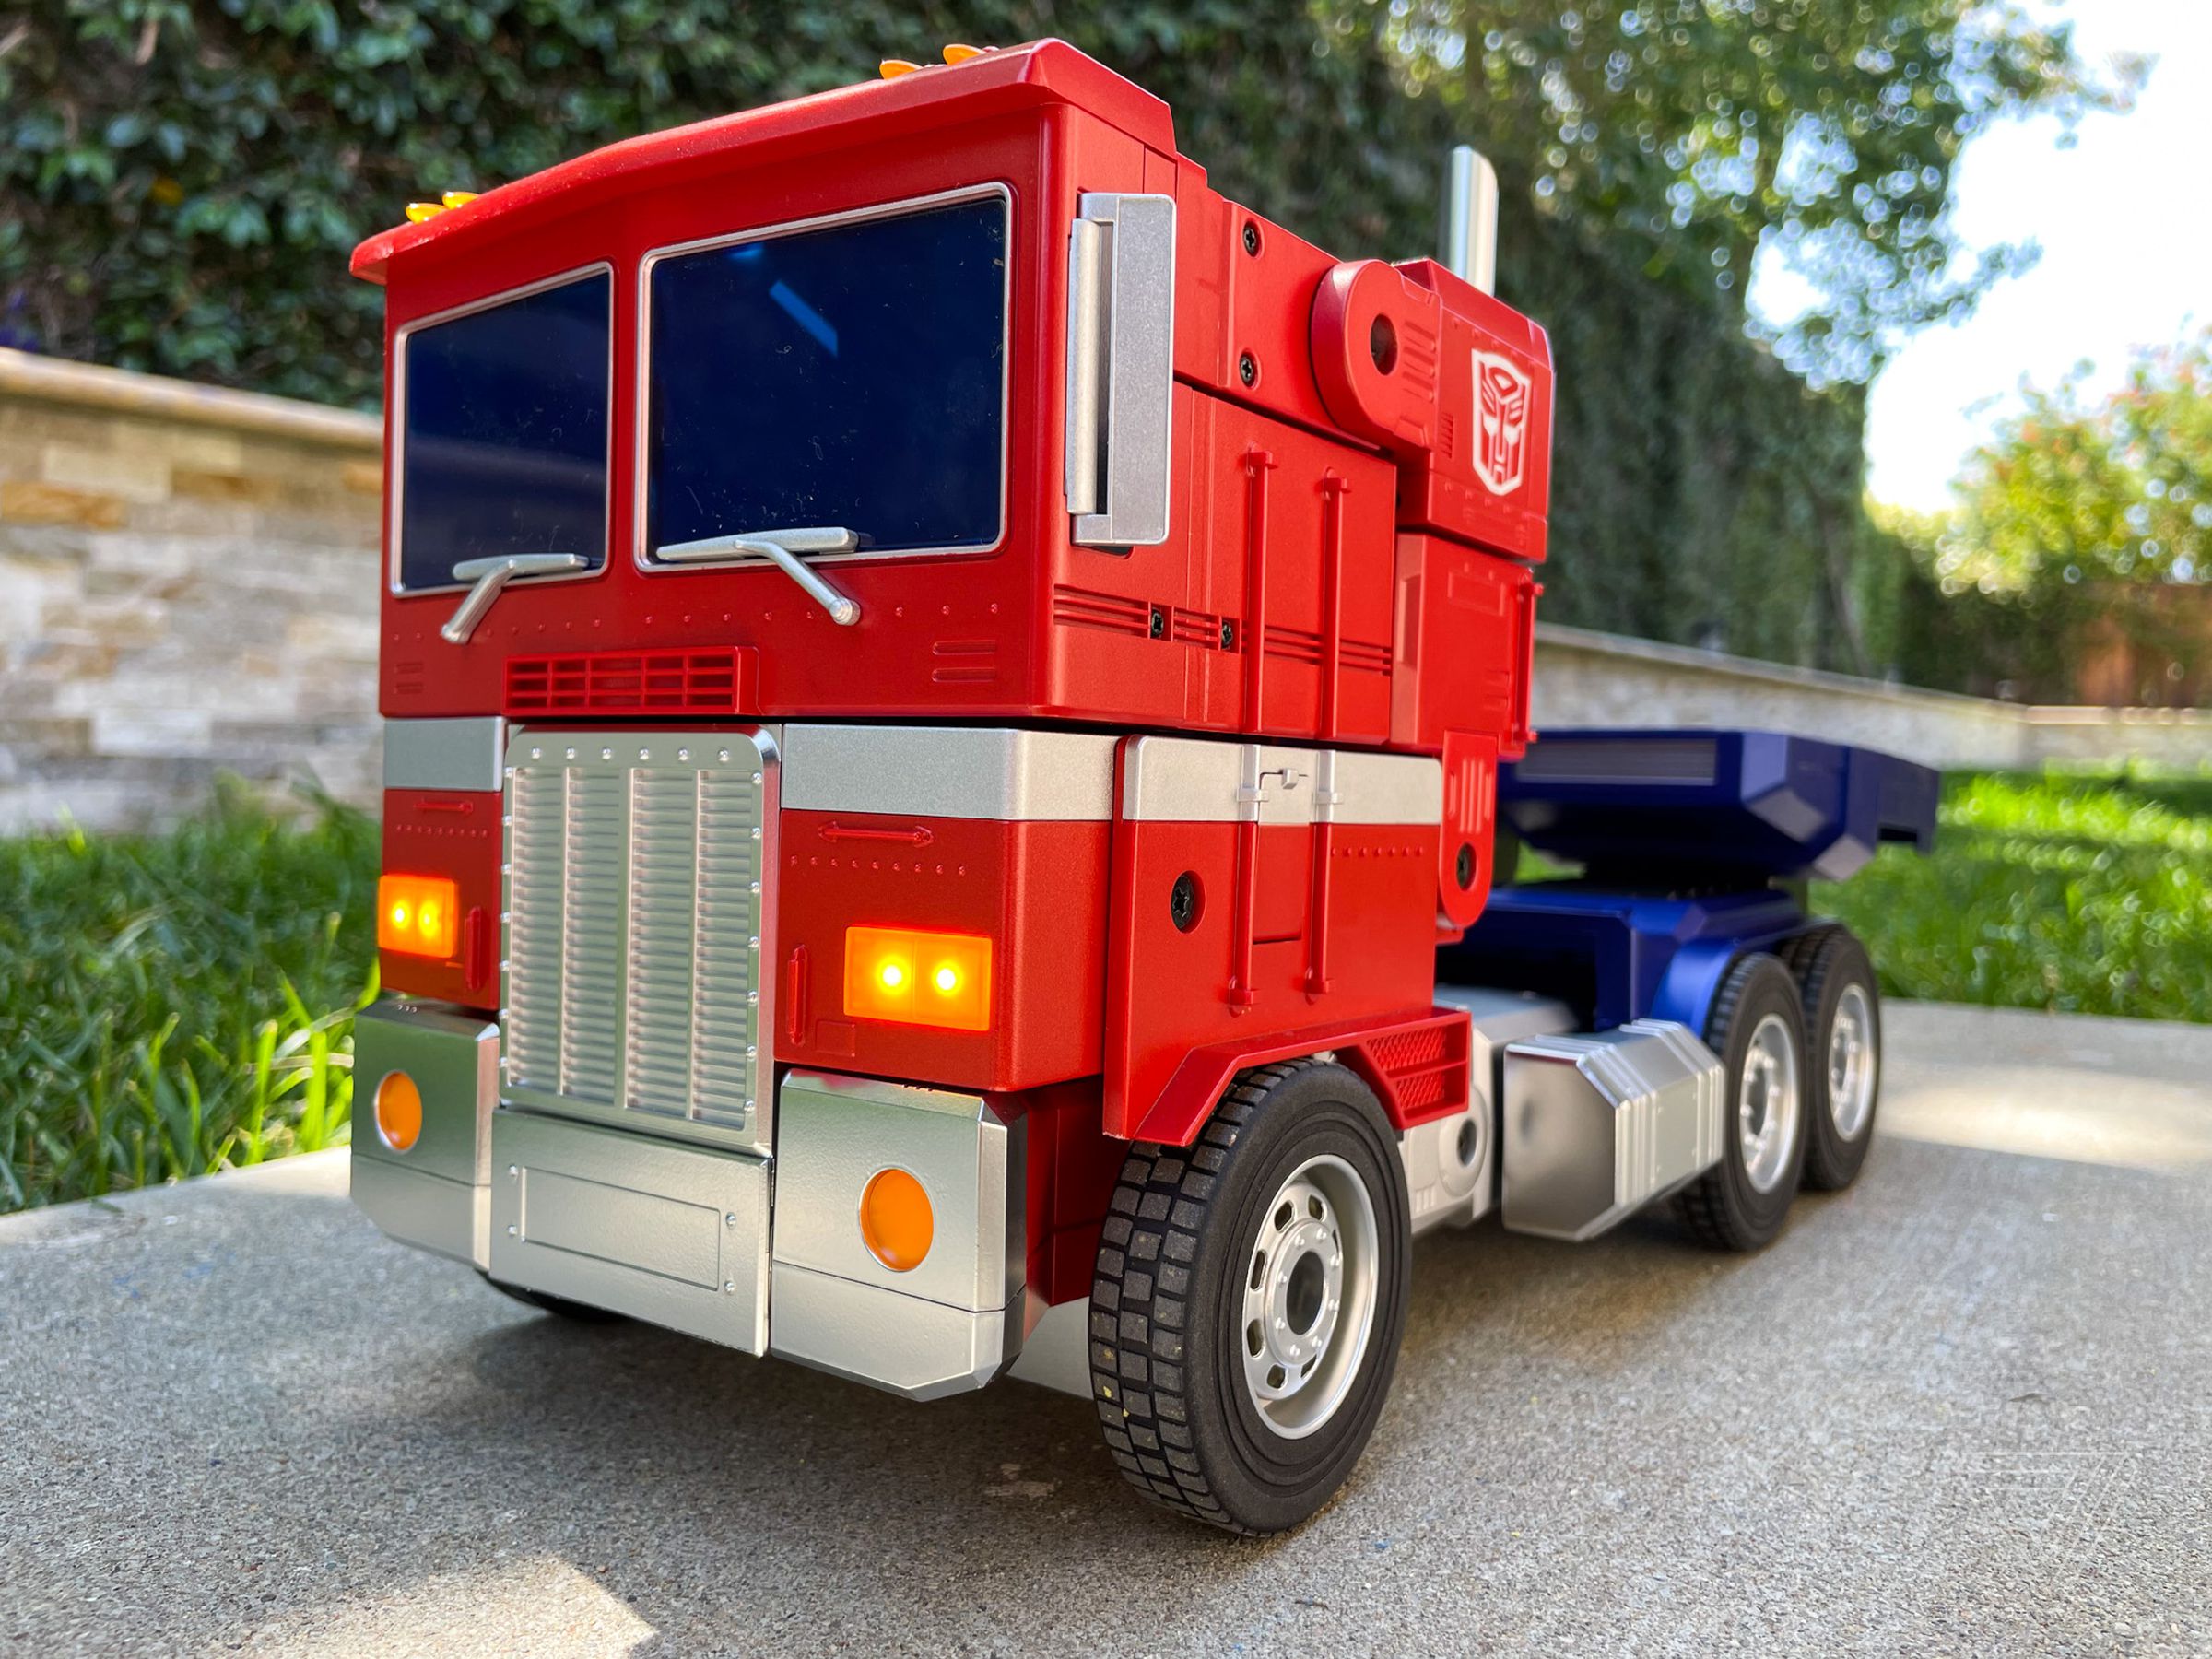 Optimus Prime in truck mode, with nice bright LED headlights and folding side mirrors.